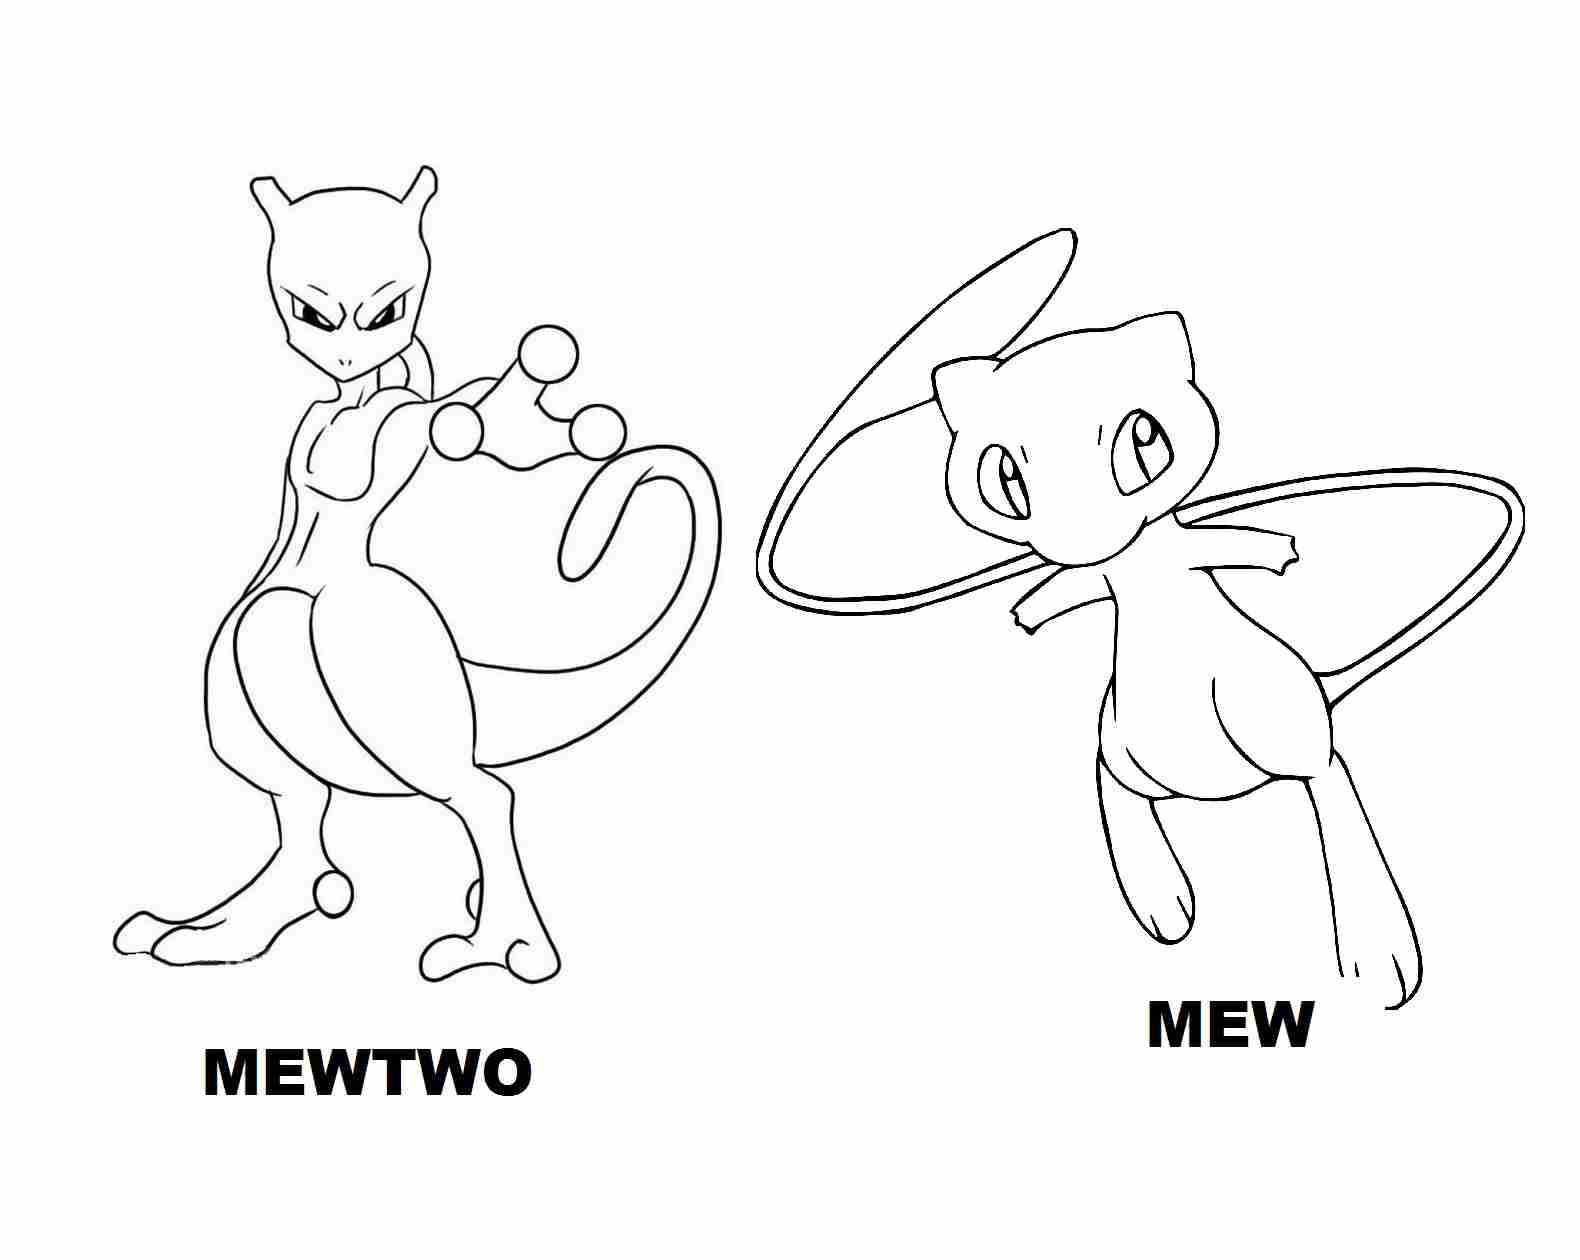 Pokemon Mewtwo Coloring Pages at GetColorings.com | Free ...